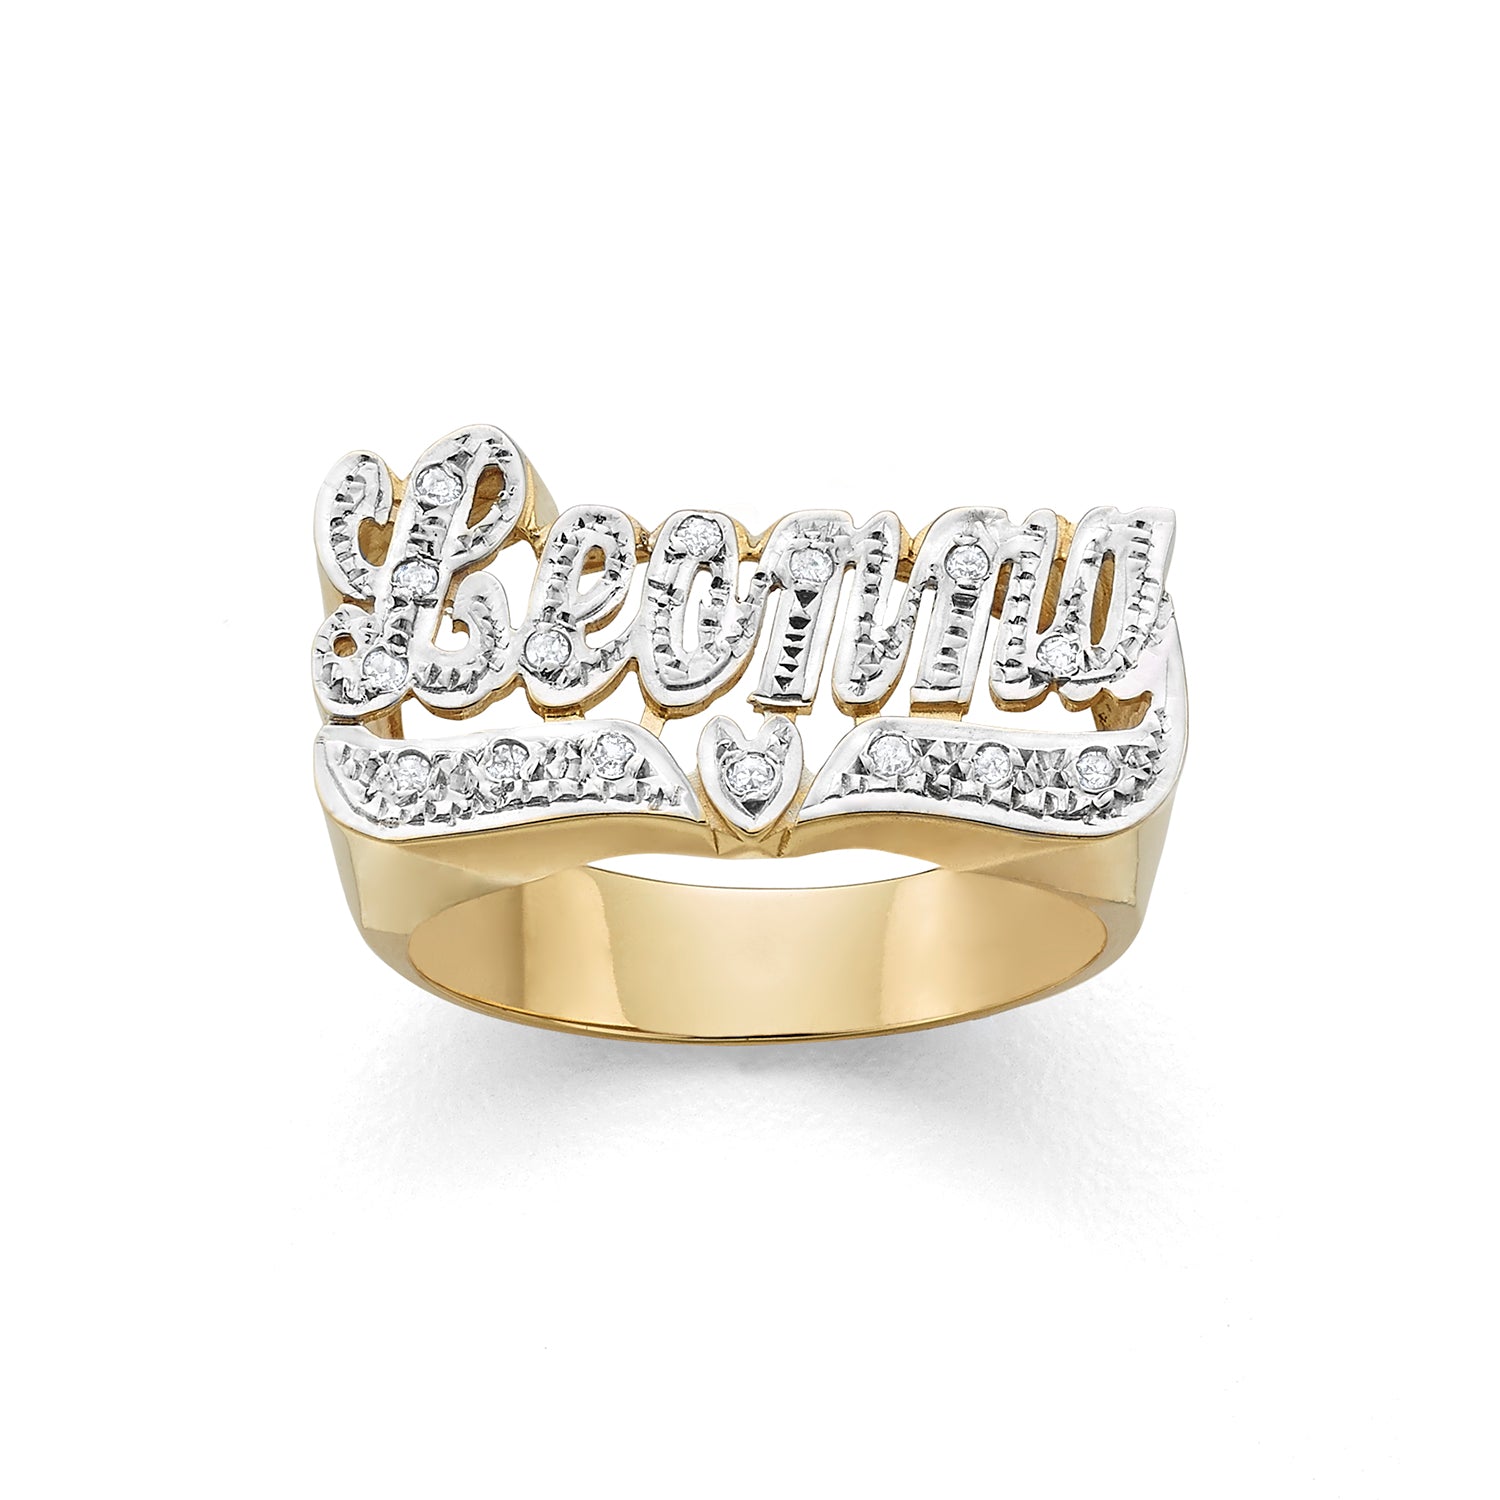 LEE110d 10k Gold  10mm All Diamond  Name  Ring  Lee Jewelry 